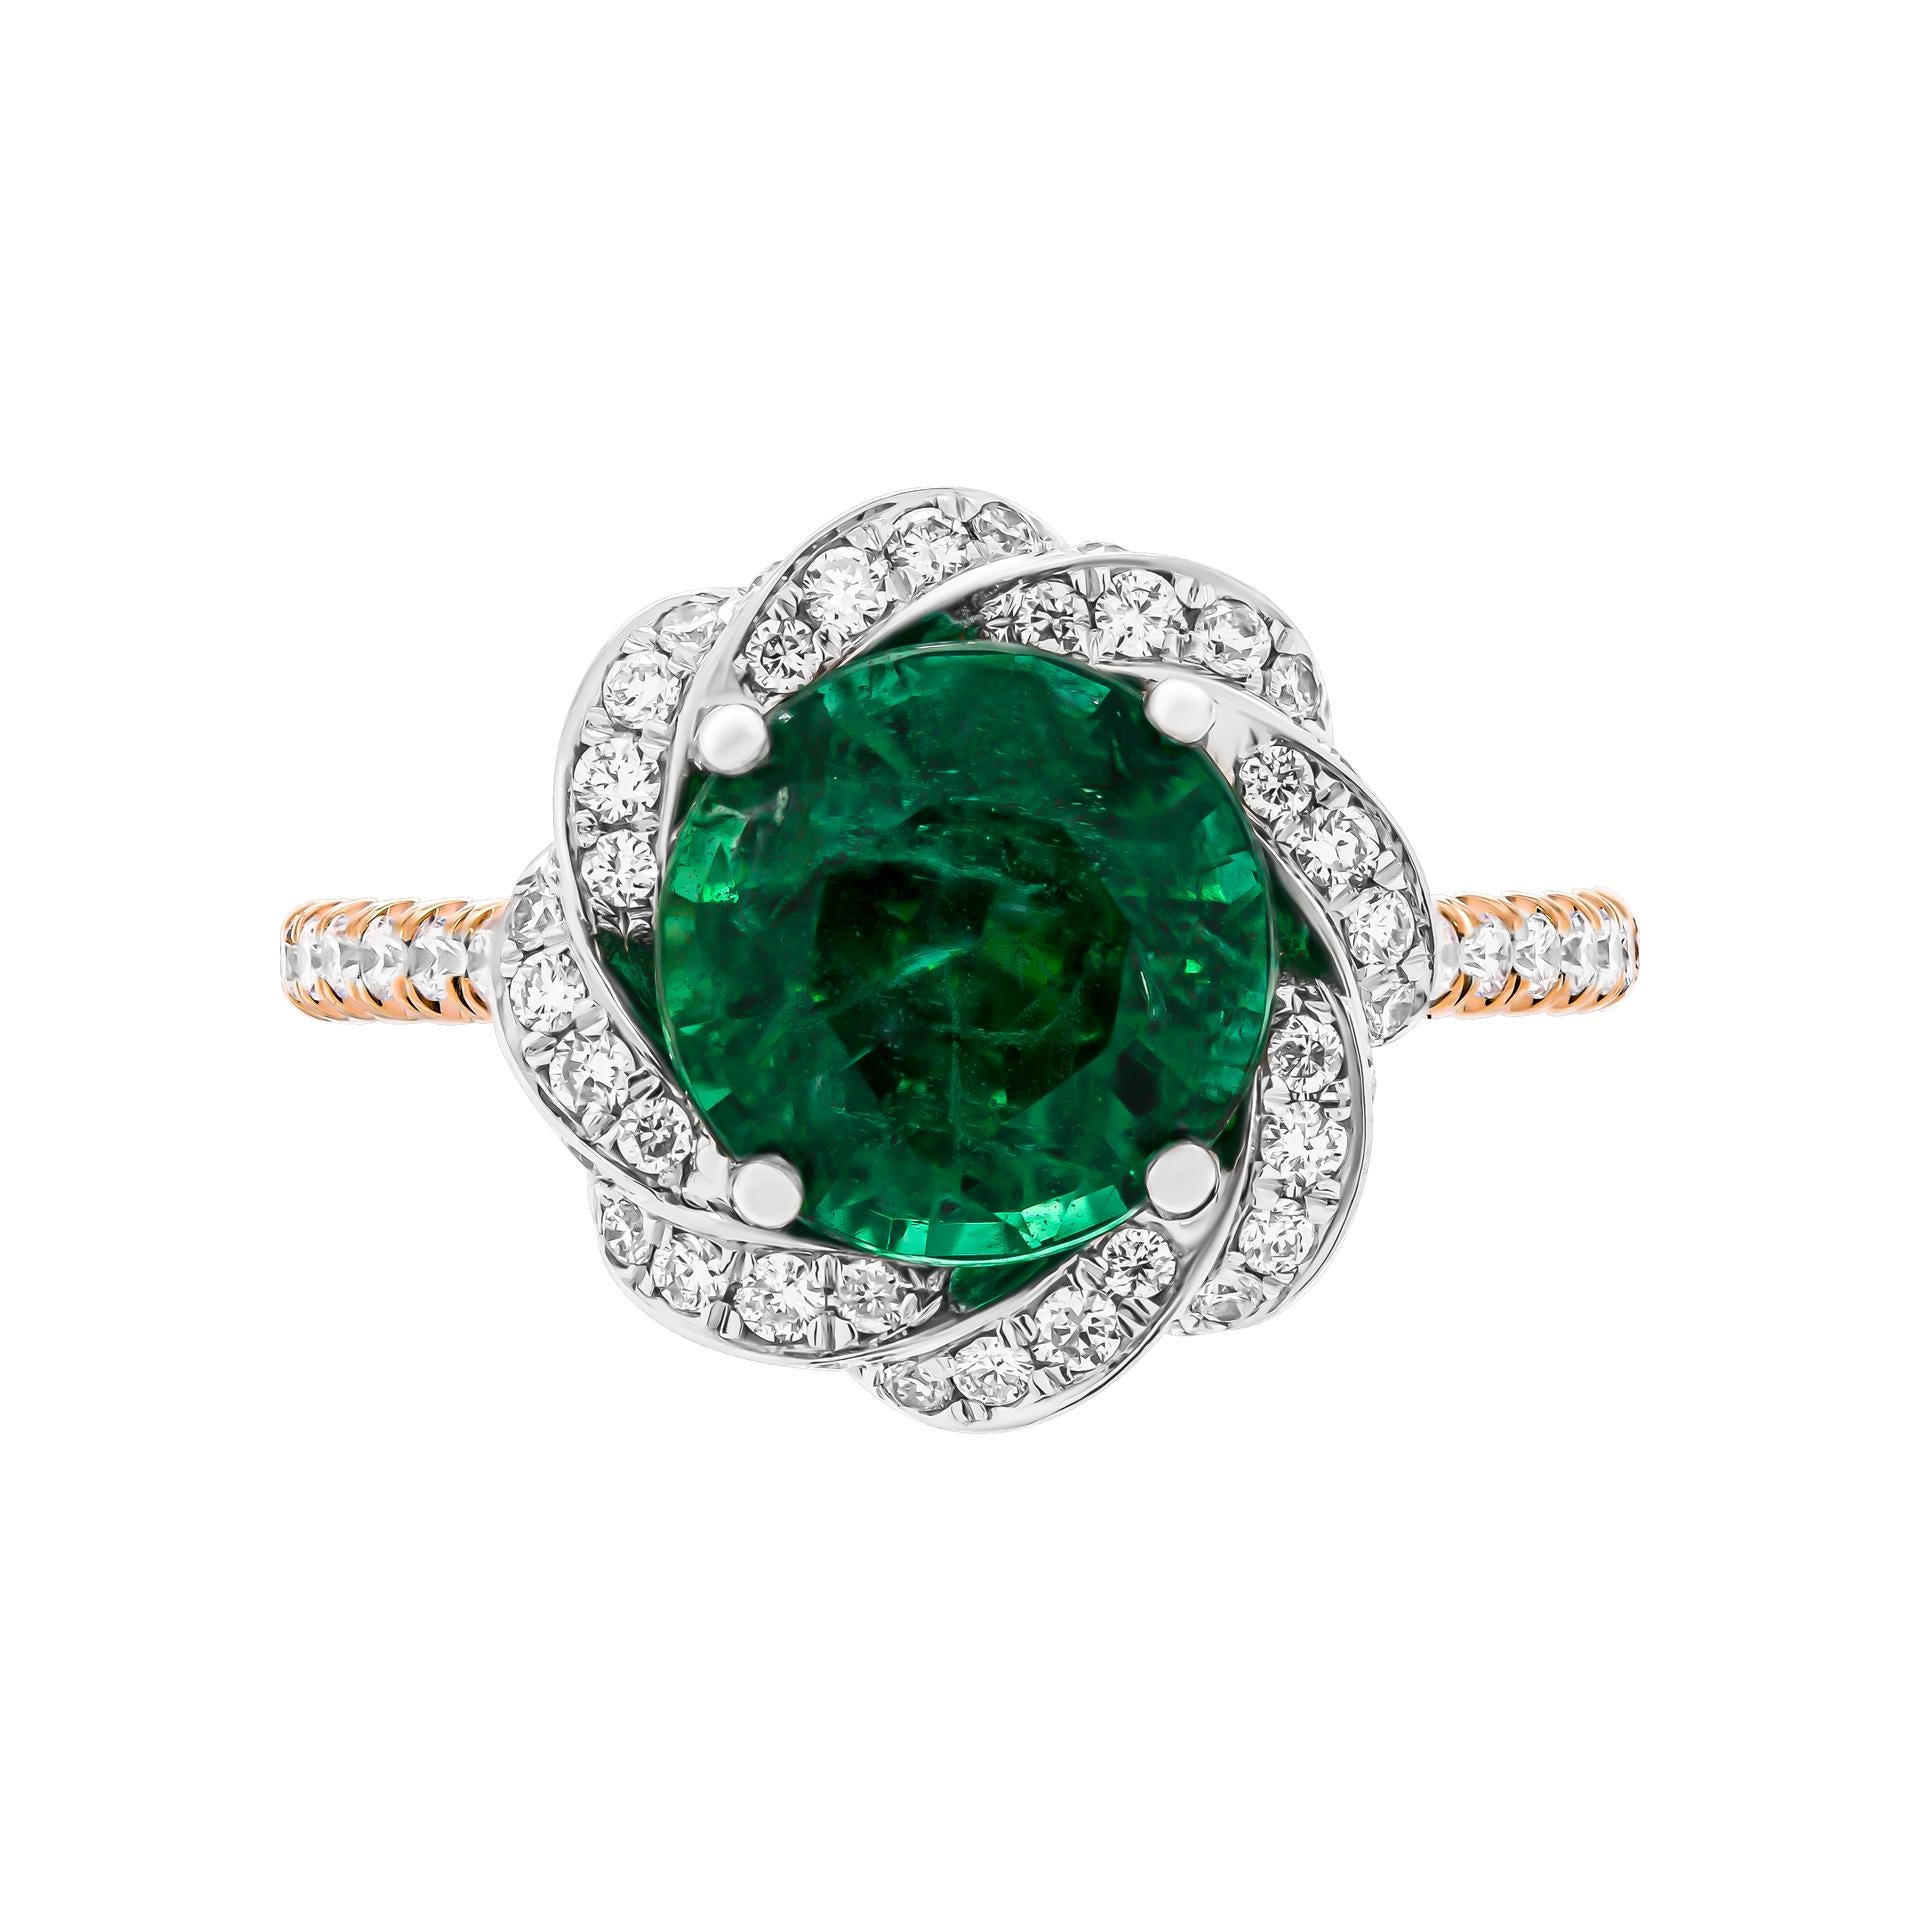 Engagement ring in PT950 & 14K Yellow Gold 
Twisted double edge halo & cathedral diamond shank with 2.60ct Round Green Emerald; 
Total carat weight of diamonds: 0.63
 Size: 5.5